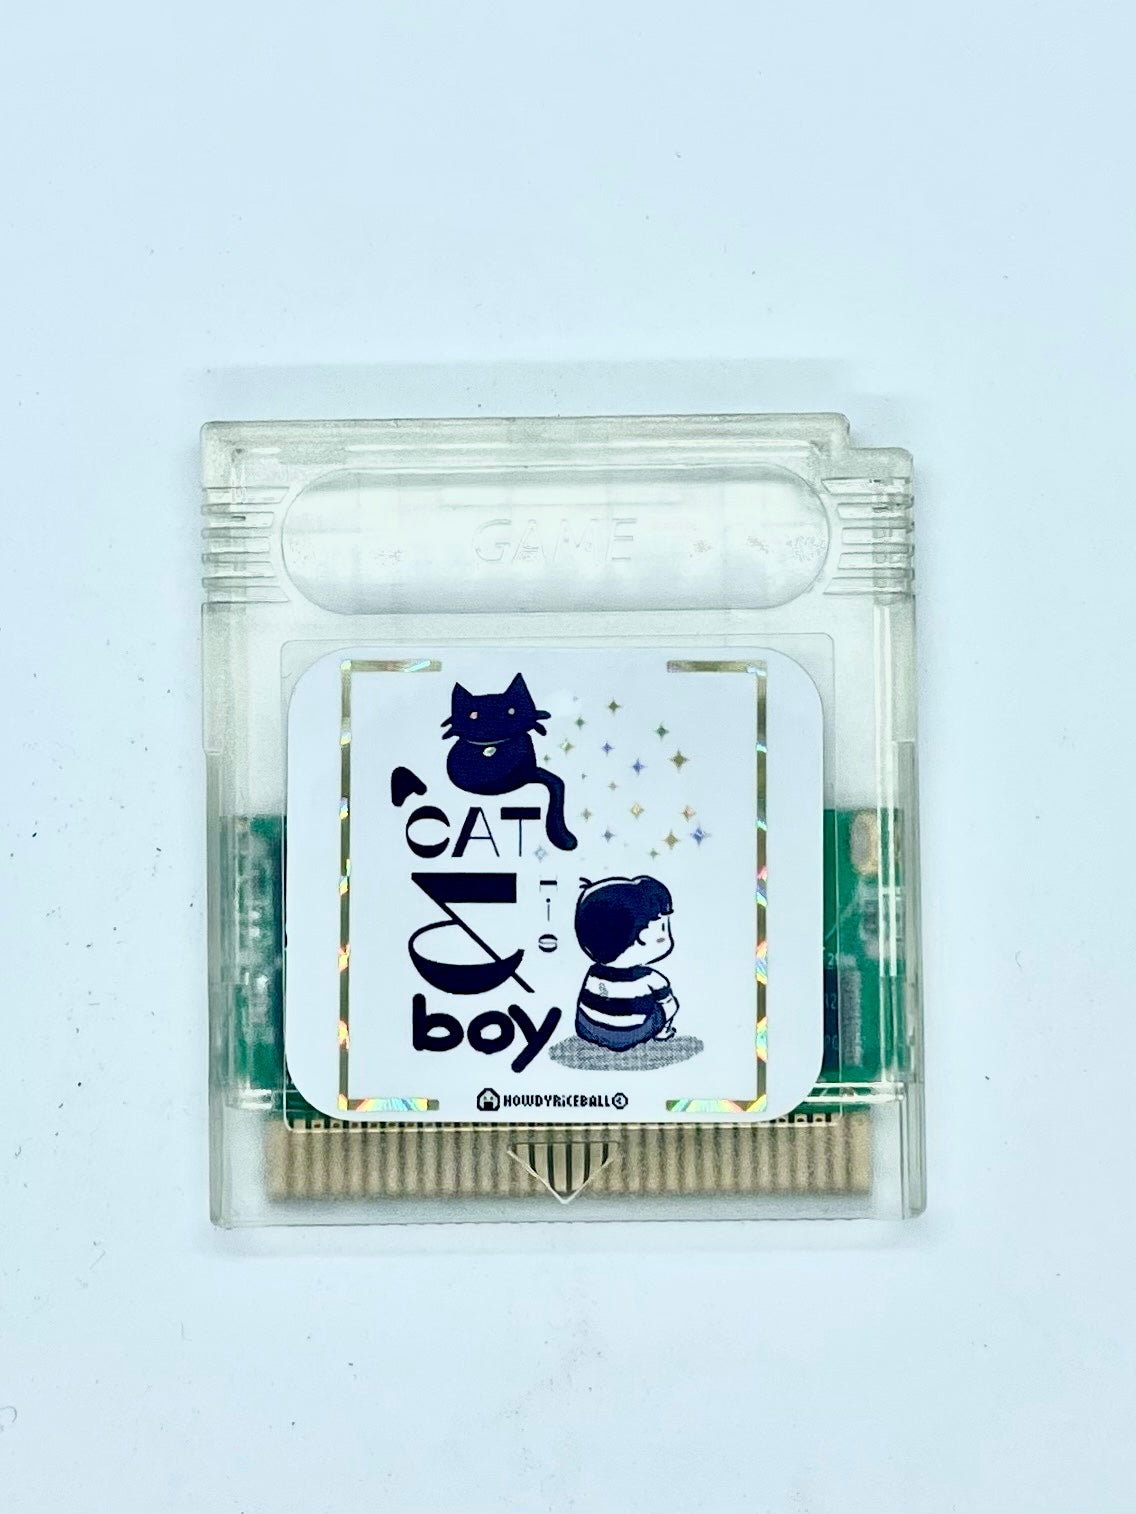 a cat & his boy physical gameboy cartridge RE-STOCK PLANNED